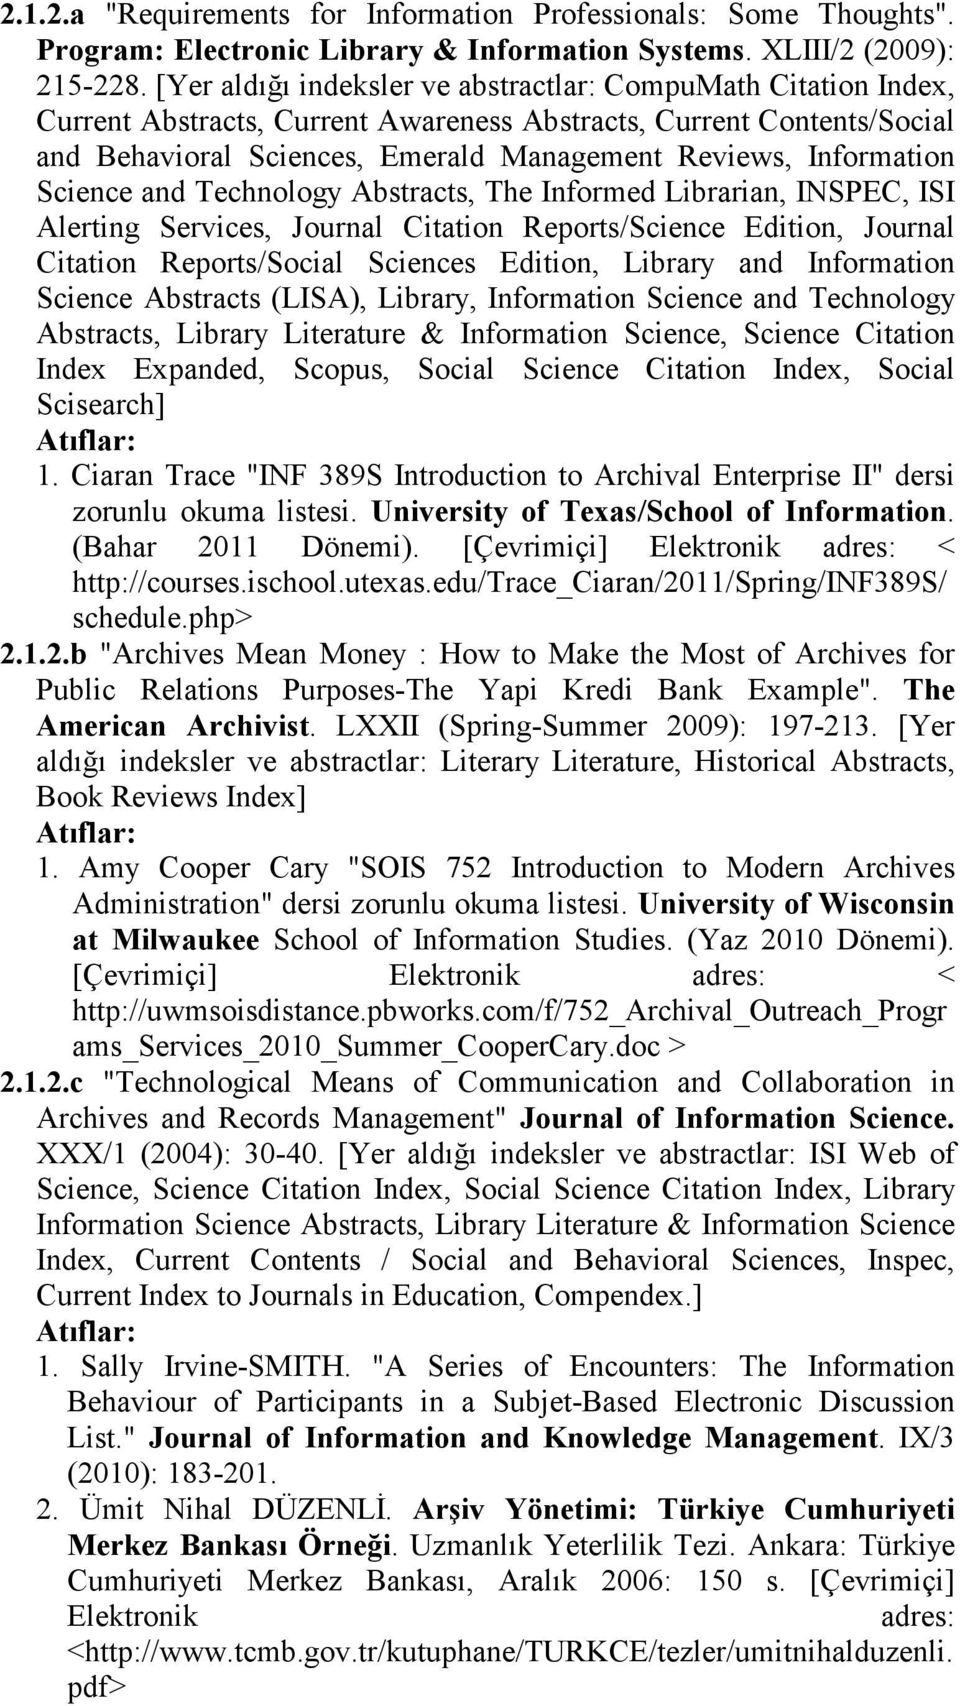 Information Science and Technology Abstracts, The Informed Librarian, INSPEC, ISI Alerting Services, Journal Citation Reports/Science Edition, Journal Citation Reports/Social Sciences Edition,